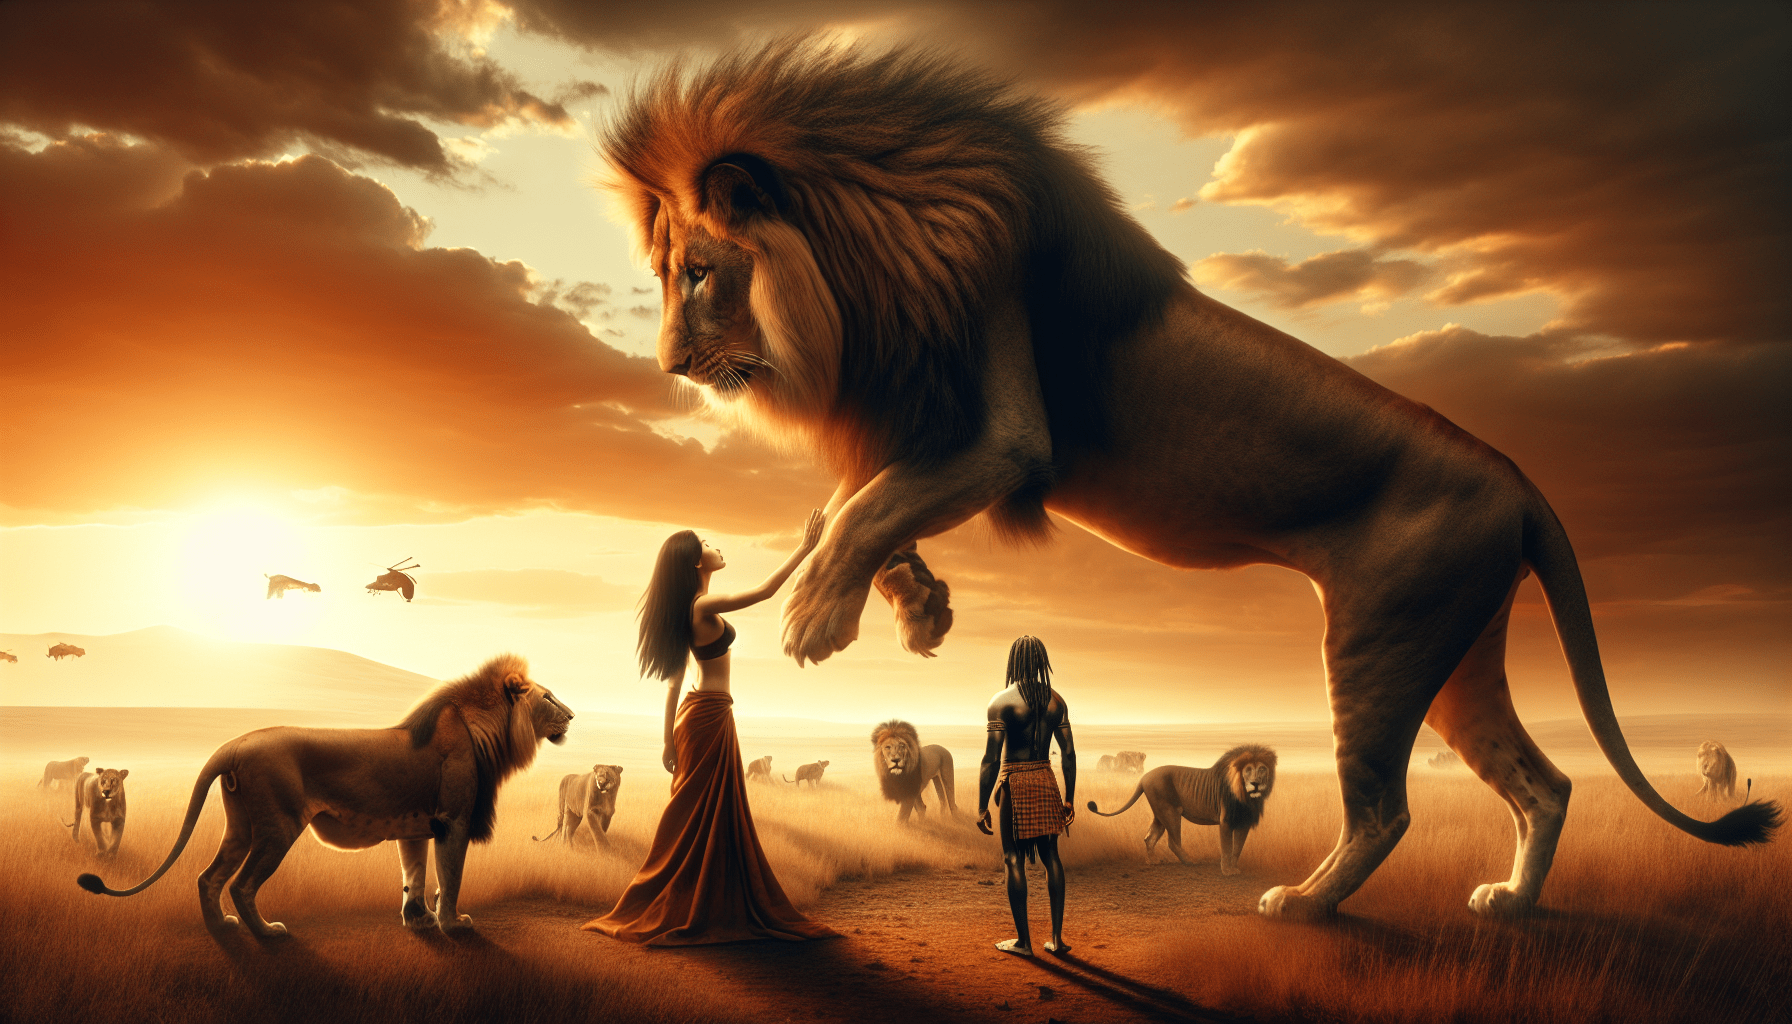 Lion Conflict With Humans: A Closer Look At The Encyclopedia